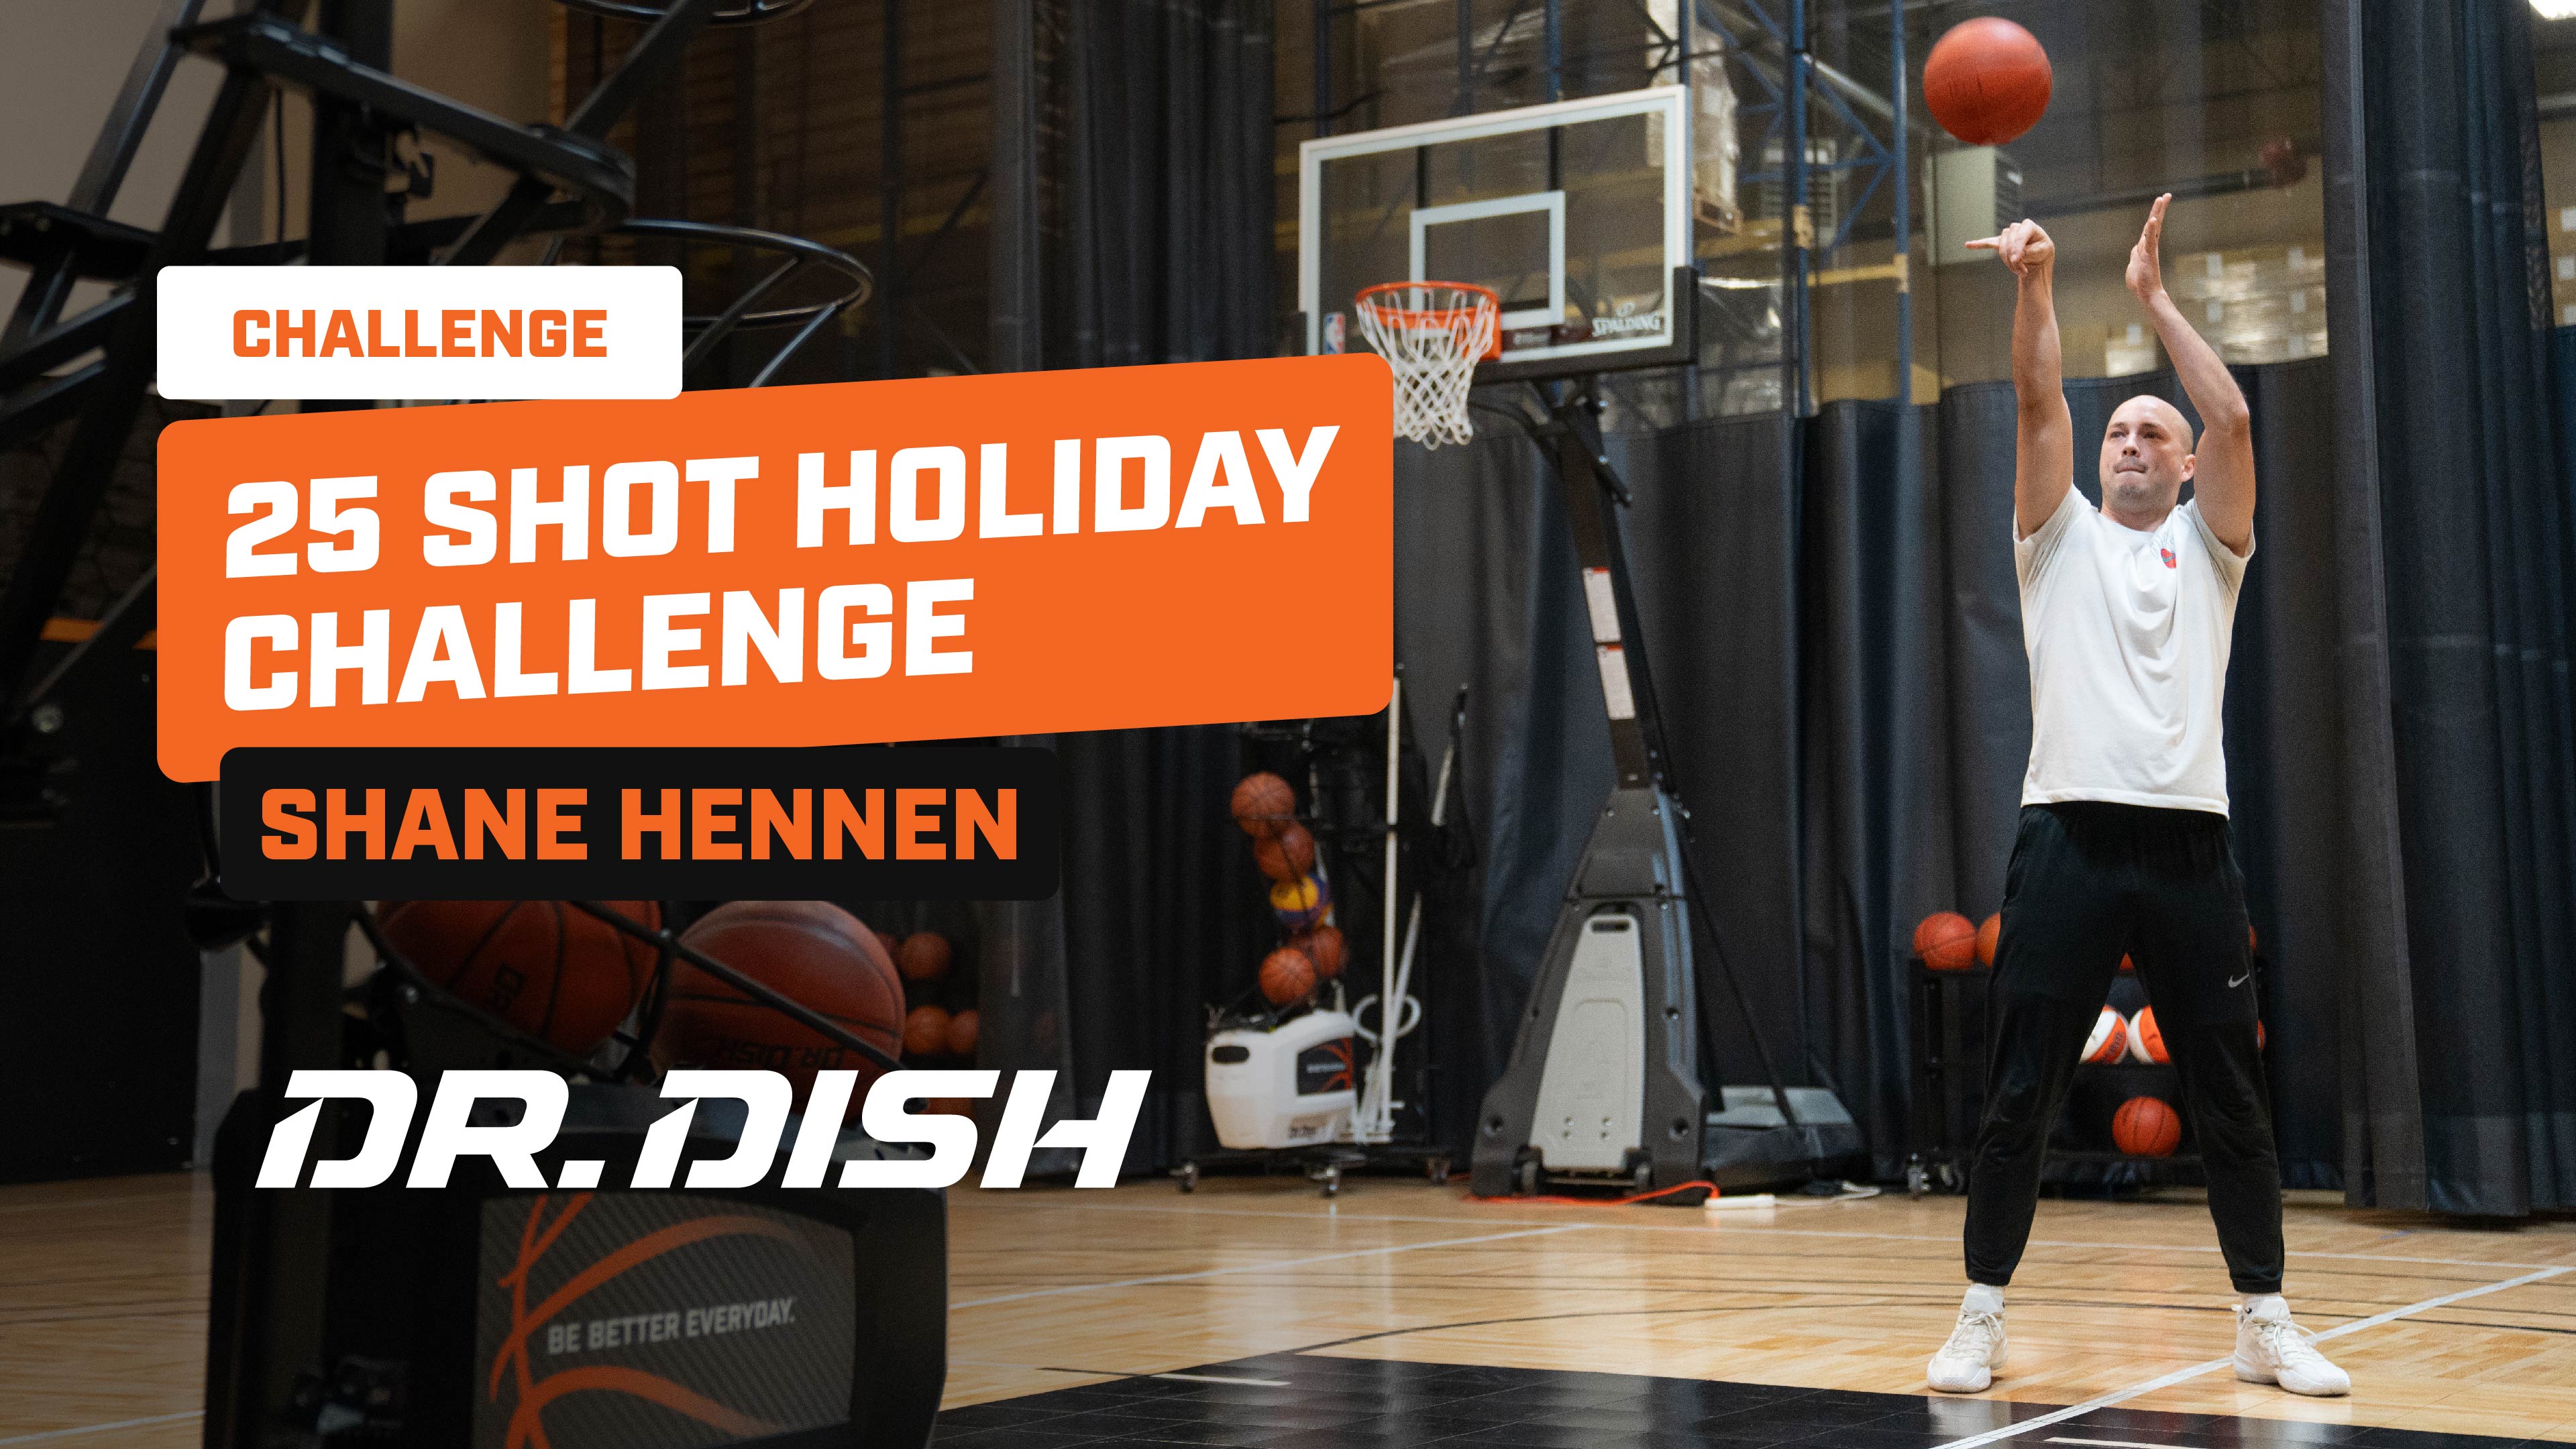 Compete in Shane Hennen's 25 Shot Holiday Basketball Challenge